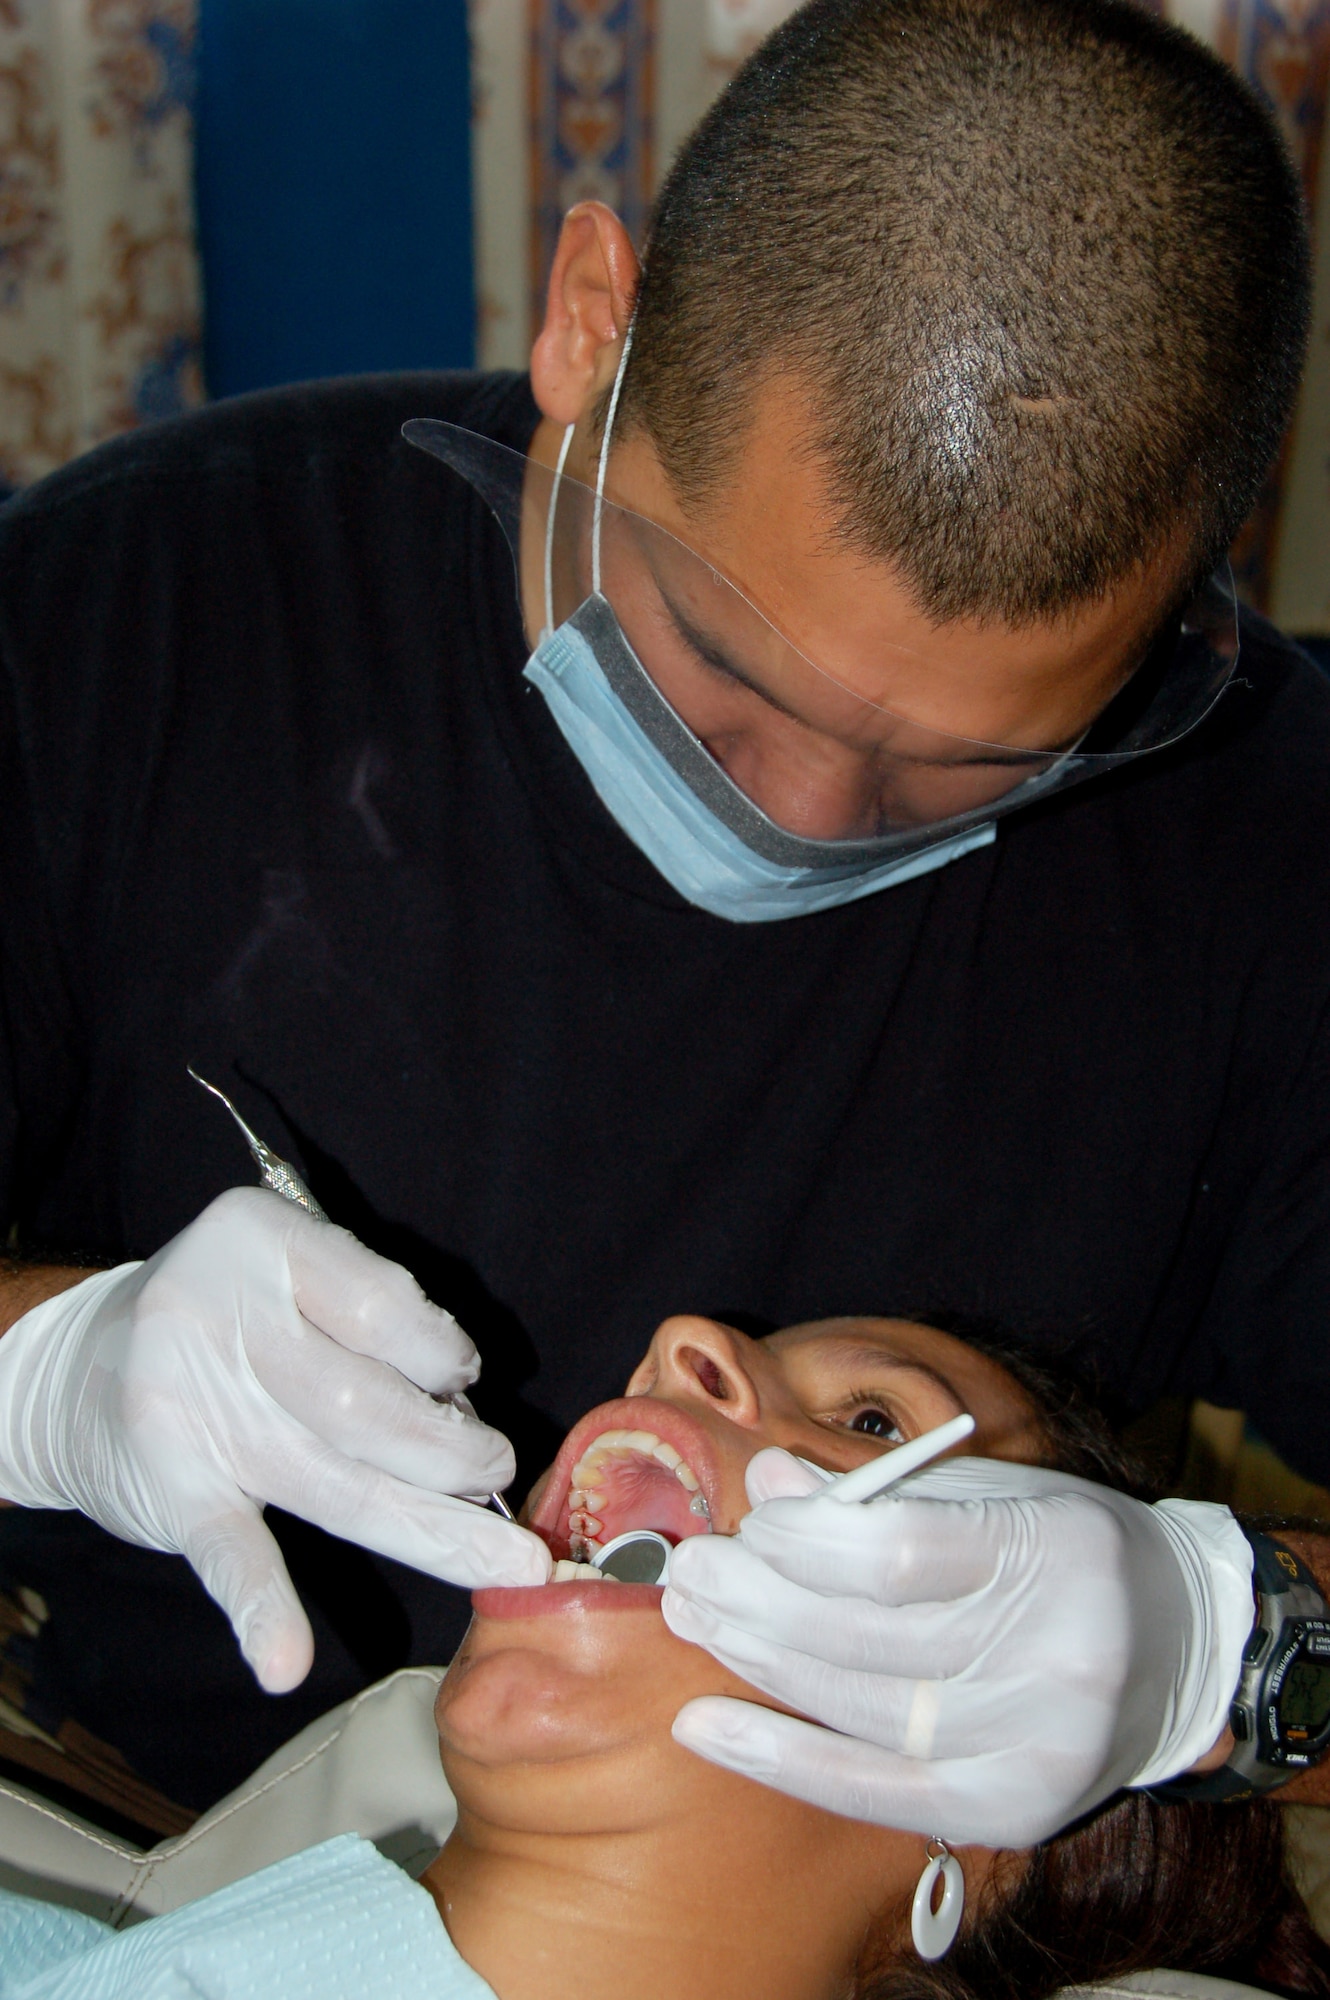 Staff Sgt. Juan Gutierrez, a bilingual dental technician from the 42nd Medical Group deployed to Medical Readiness Training Exercise Panama, cleans a patient’s teeth at a school in Pesé, Panama, Monday. (Air Force photo by Capt. Ben Sakrisson)